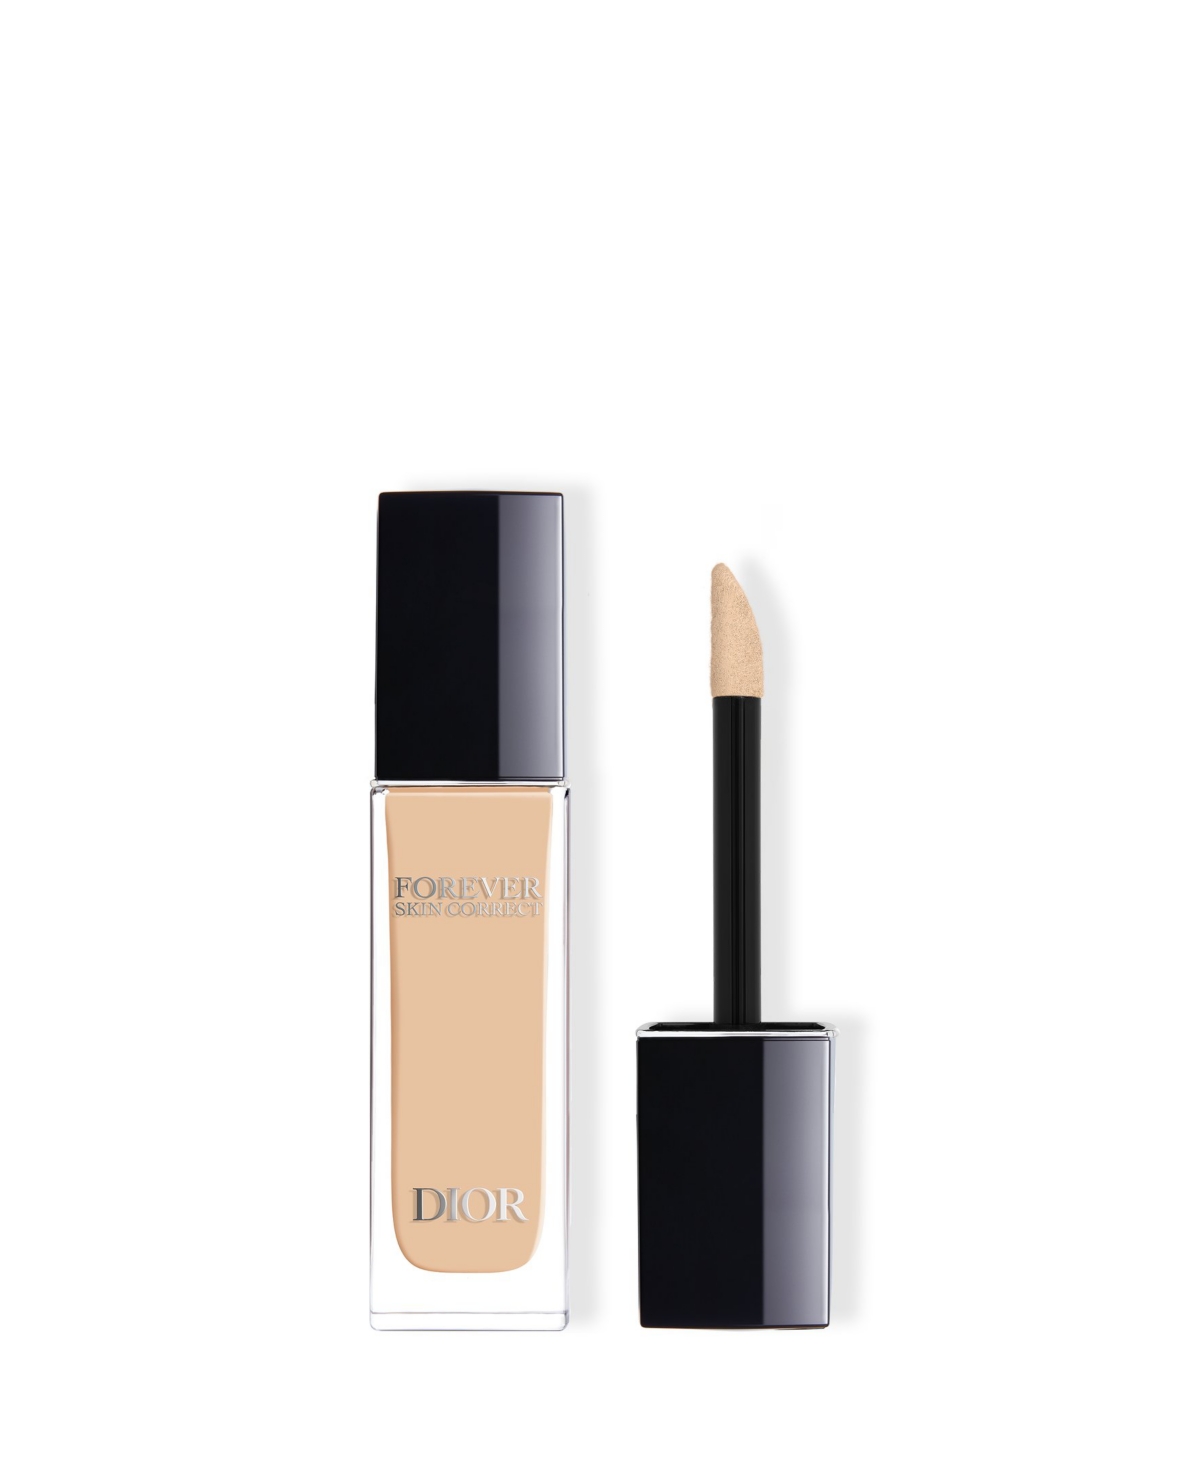 Dior Forever Skin Correct Full-coverage Concealer In N Neutral (very Light Skin With Neutra